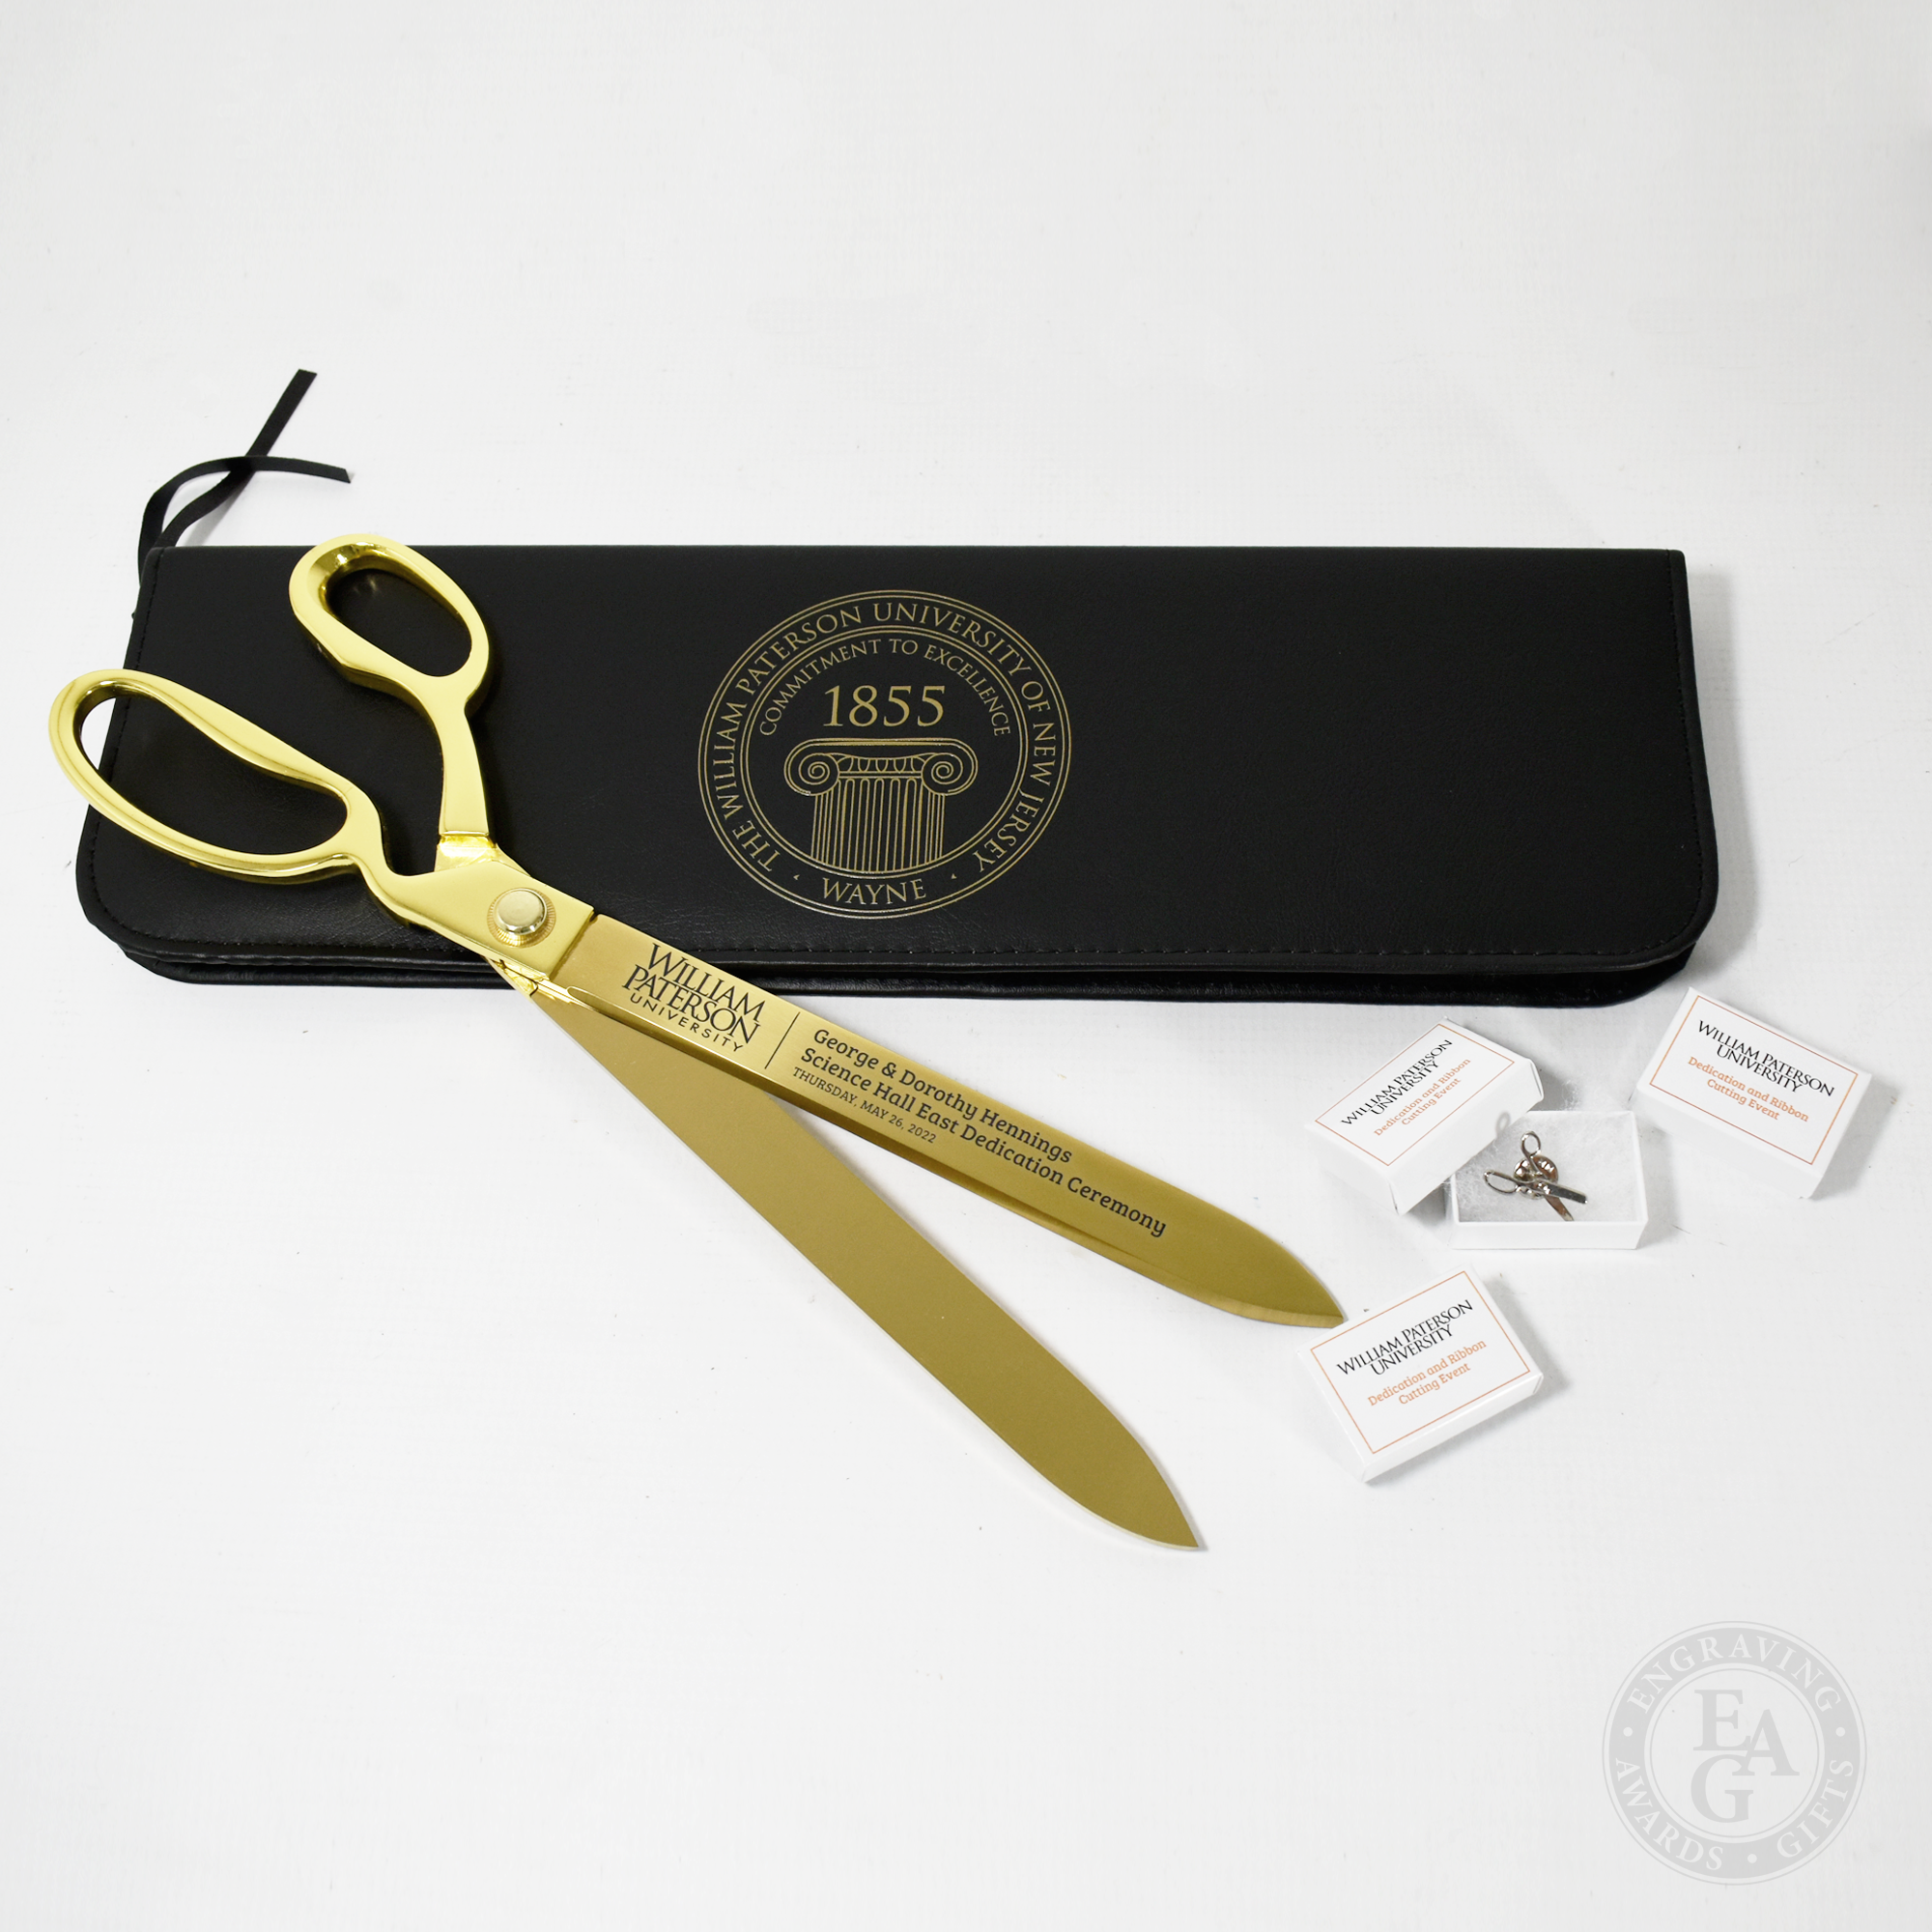  Ceremonial Scissors for ribbon cutting events are 12 long and  gold plated : Arts, Crafts & Sewing